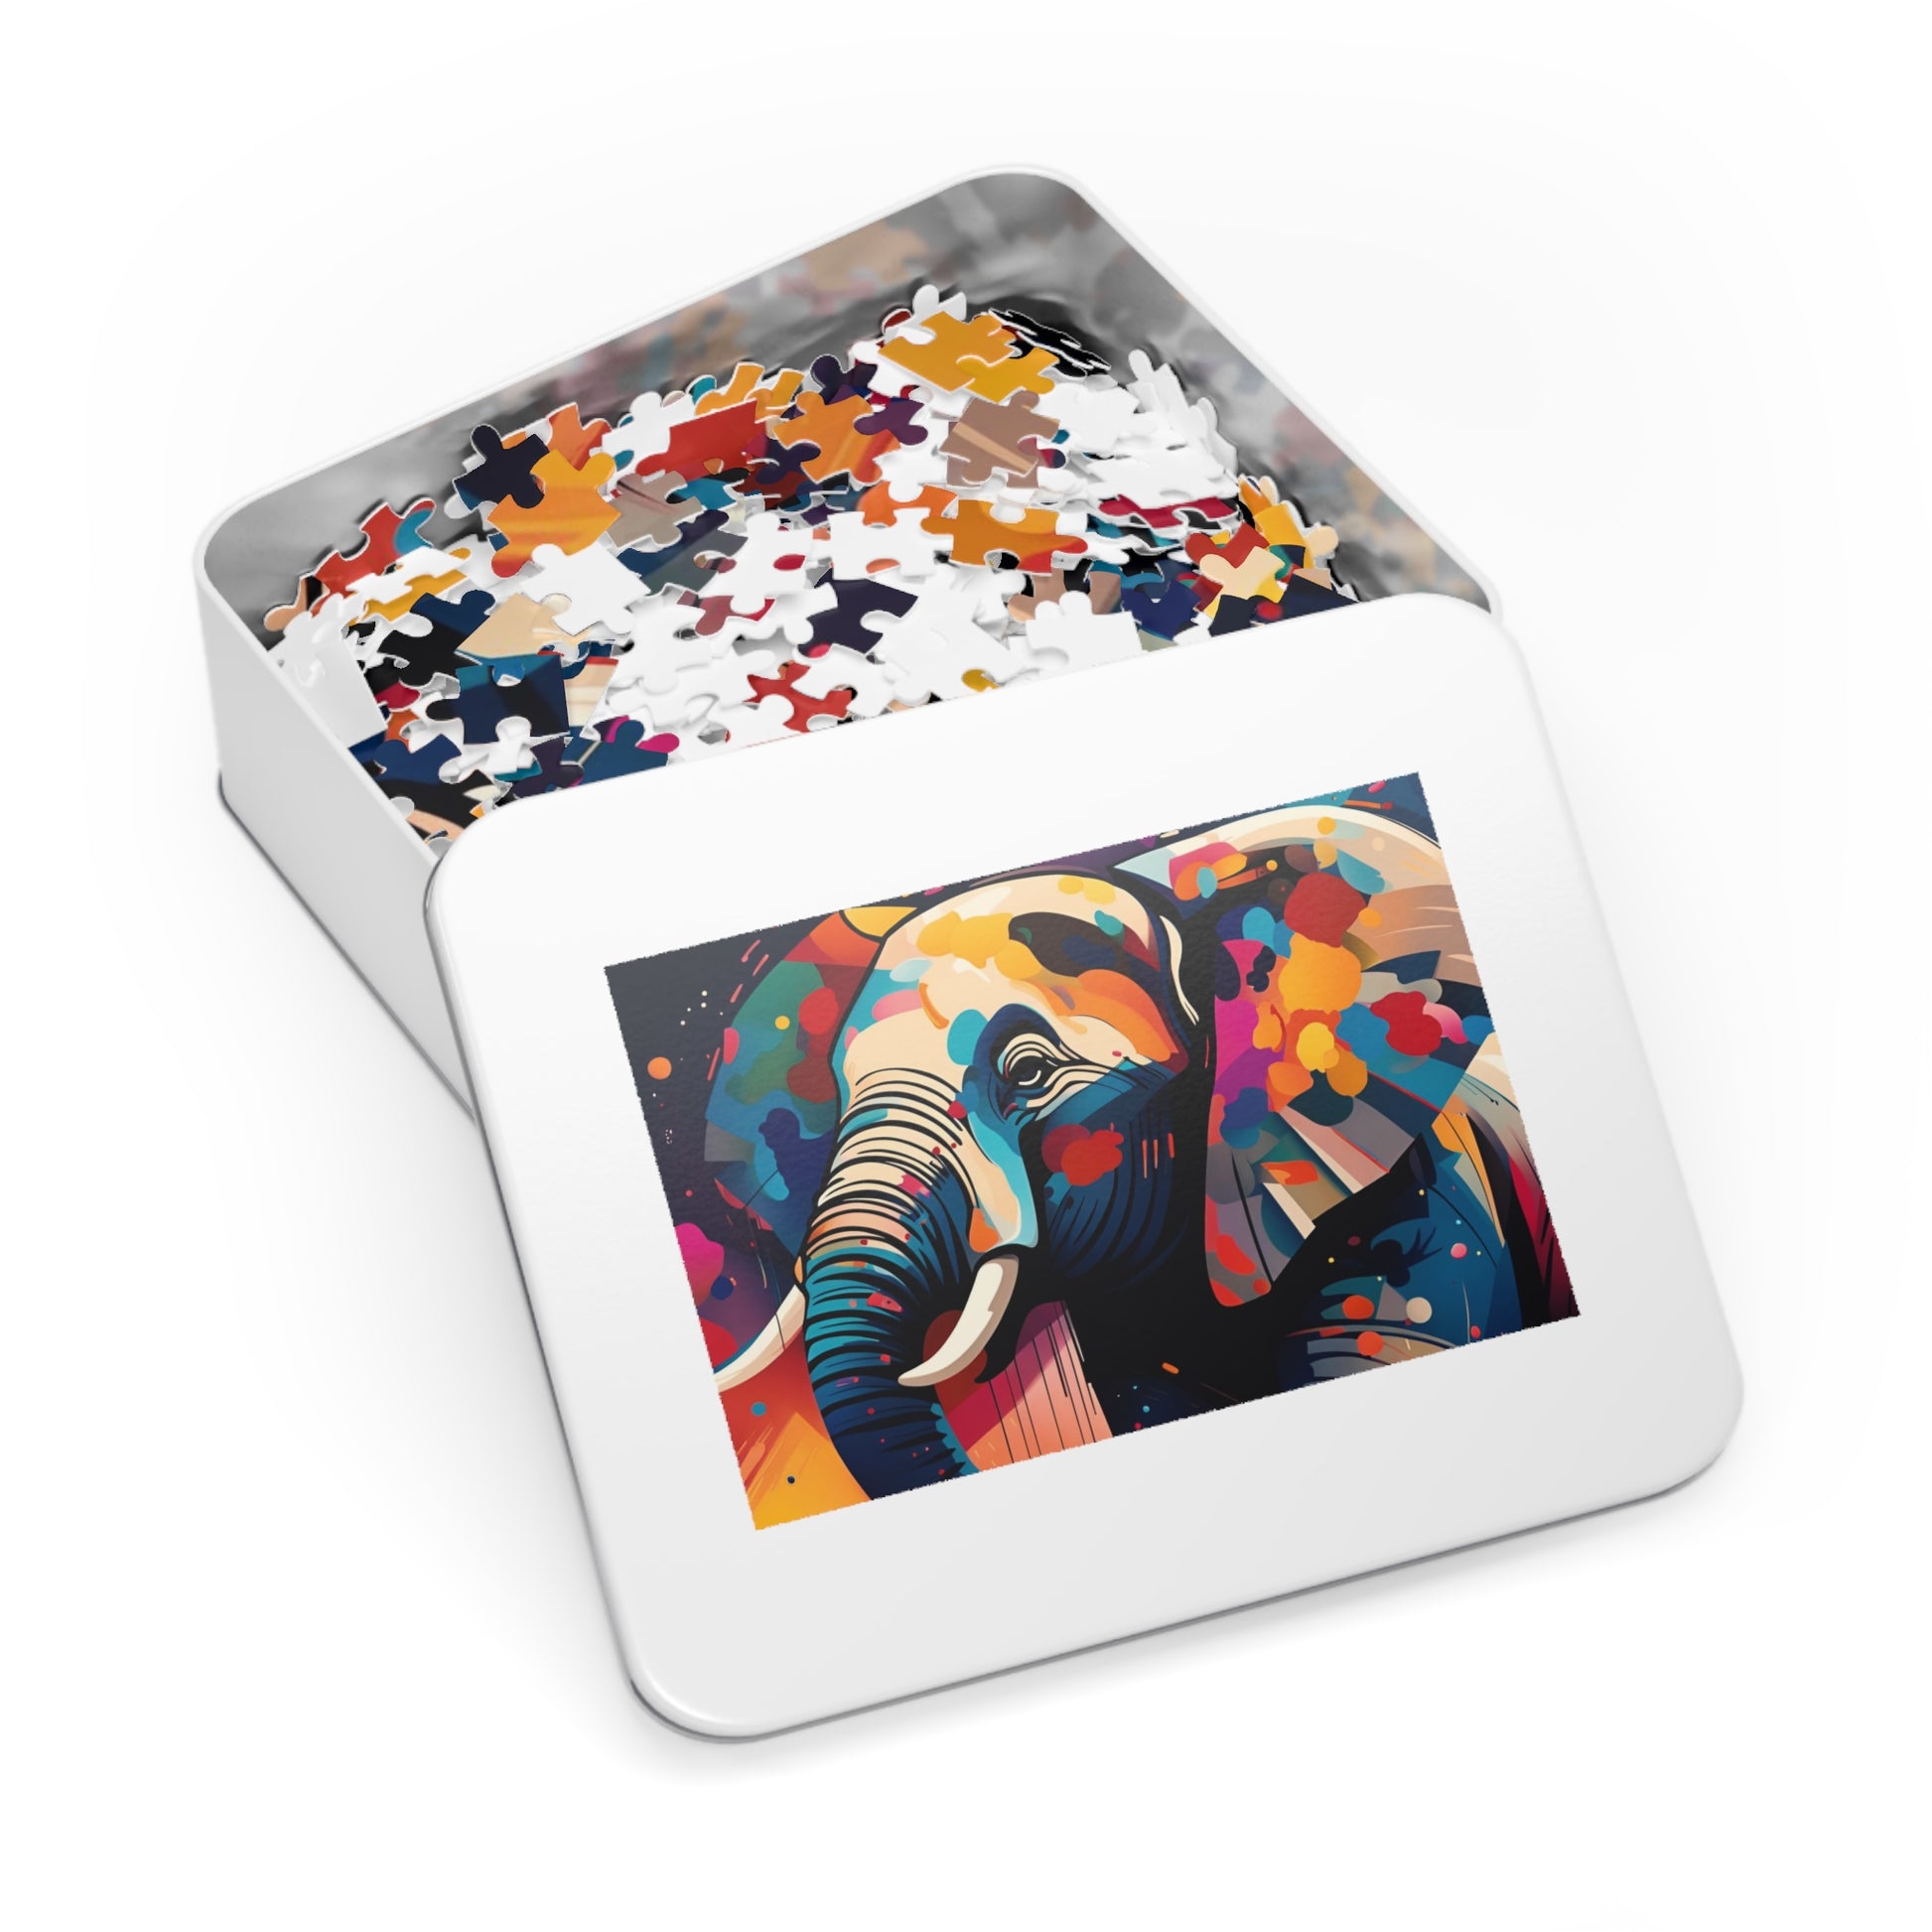 Multicolor Elephant Head Print on 1000 Pieces Puzzle in tin